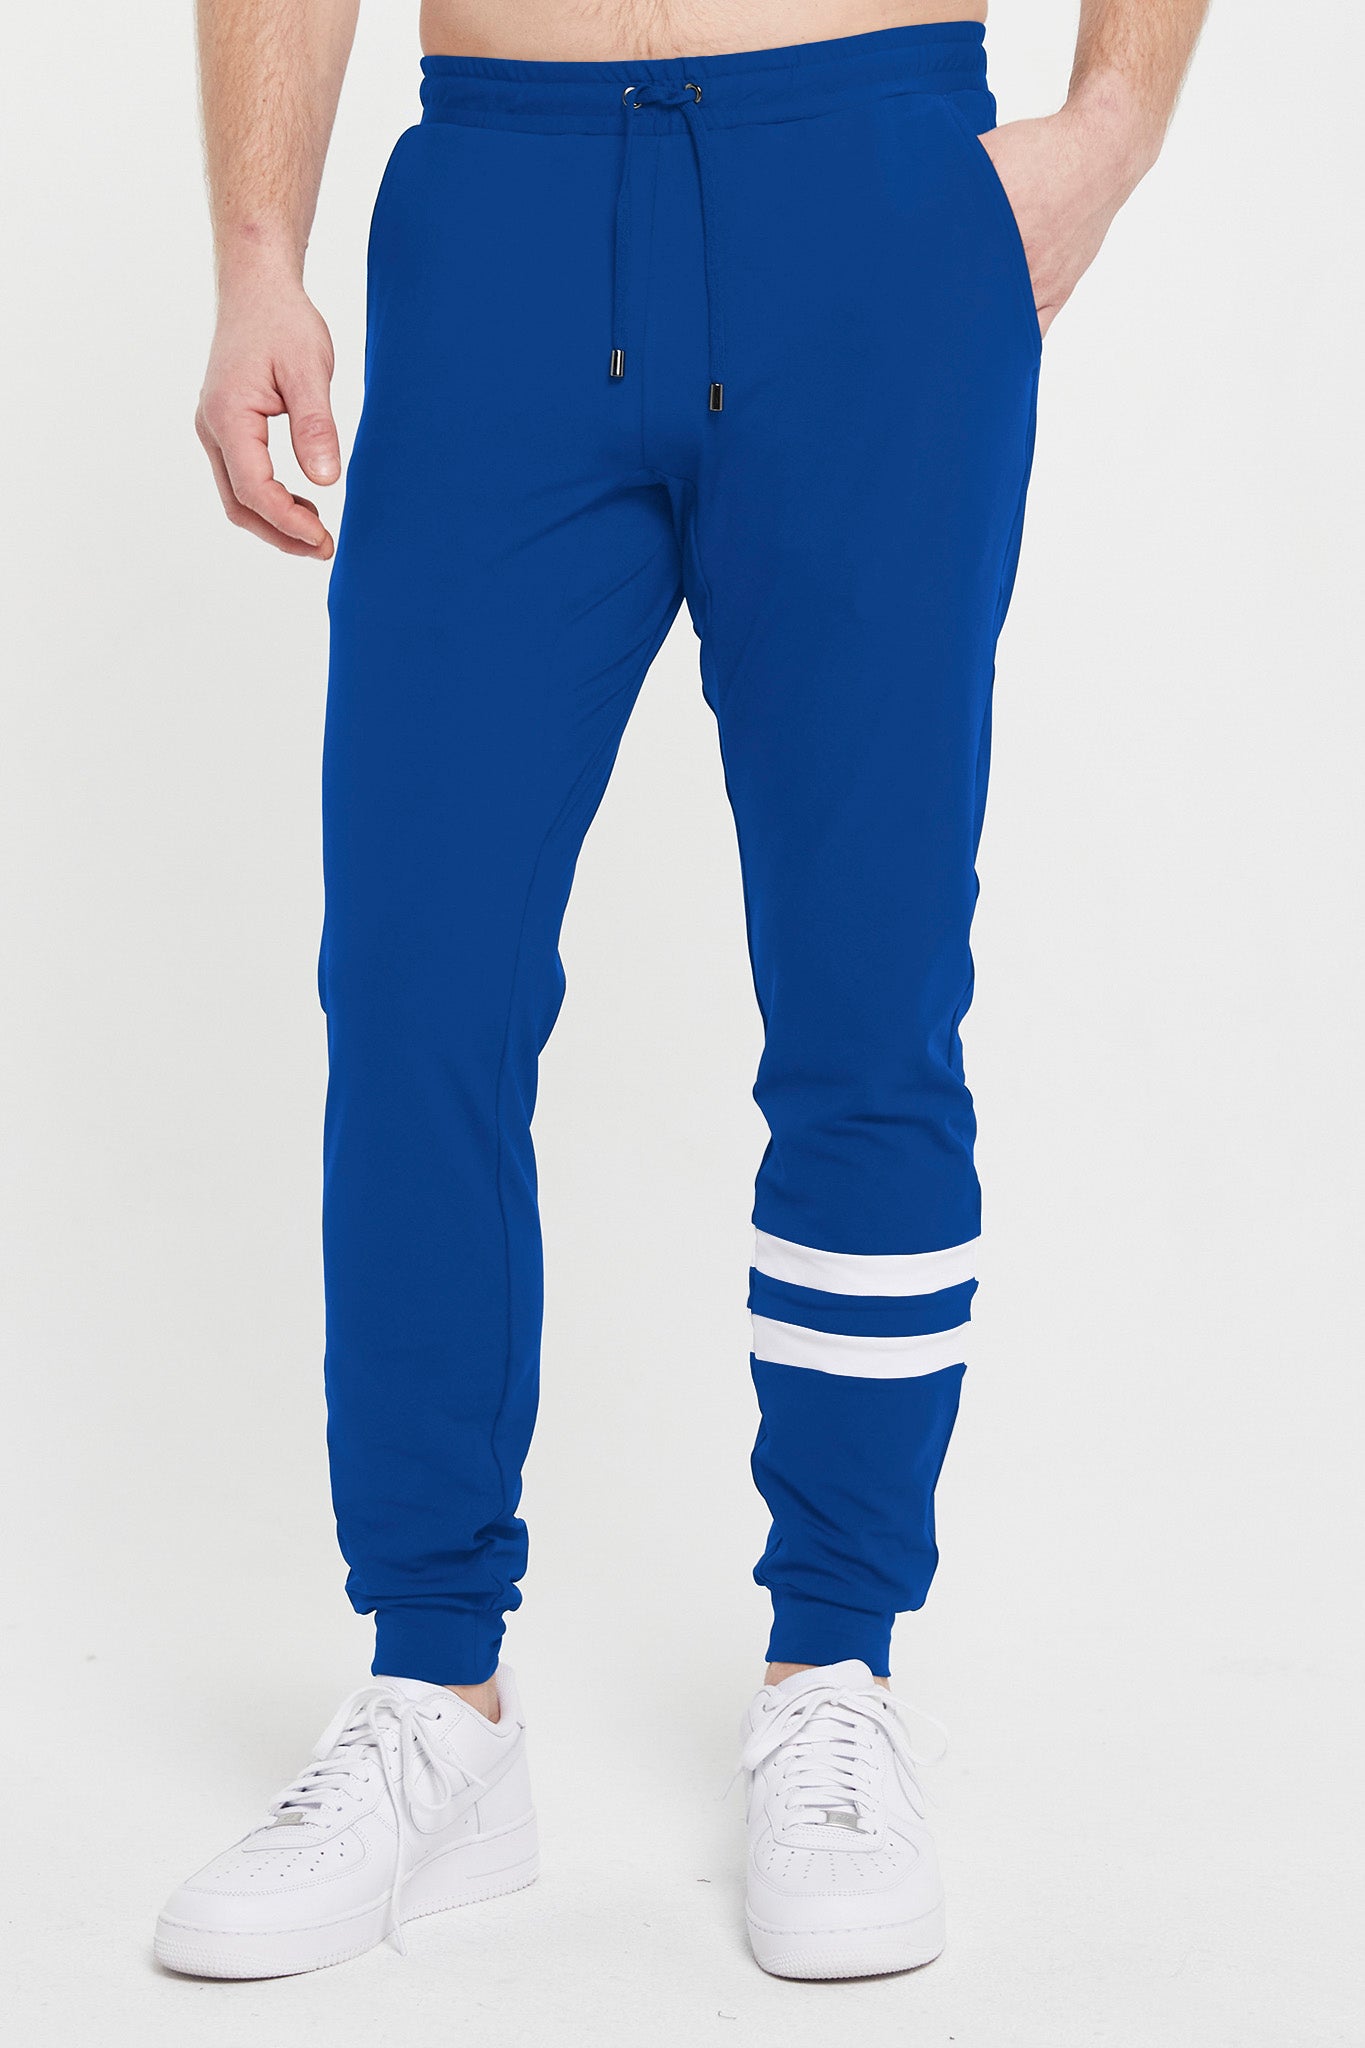 Image of the denton stripe jogger in classic blue